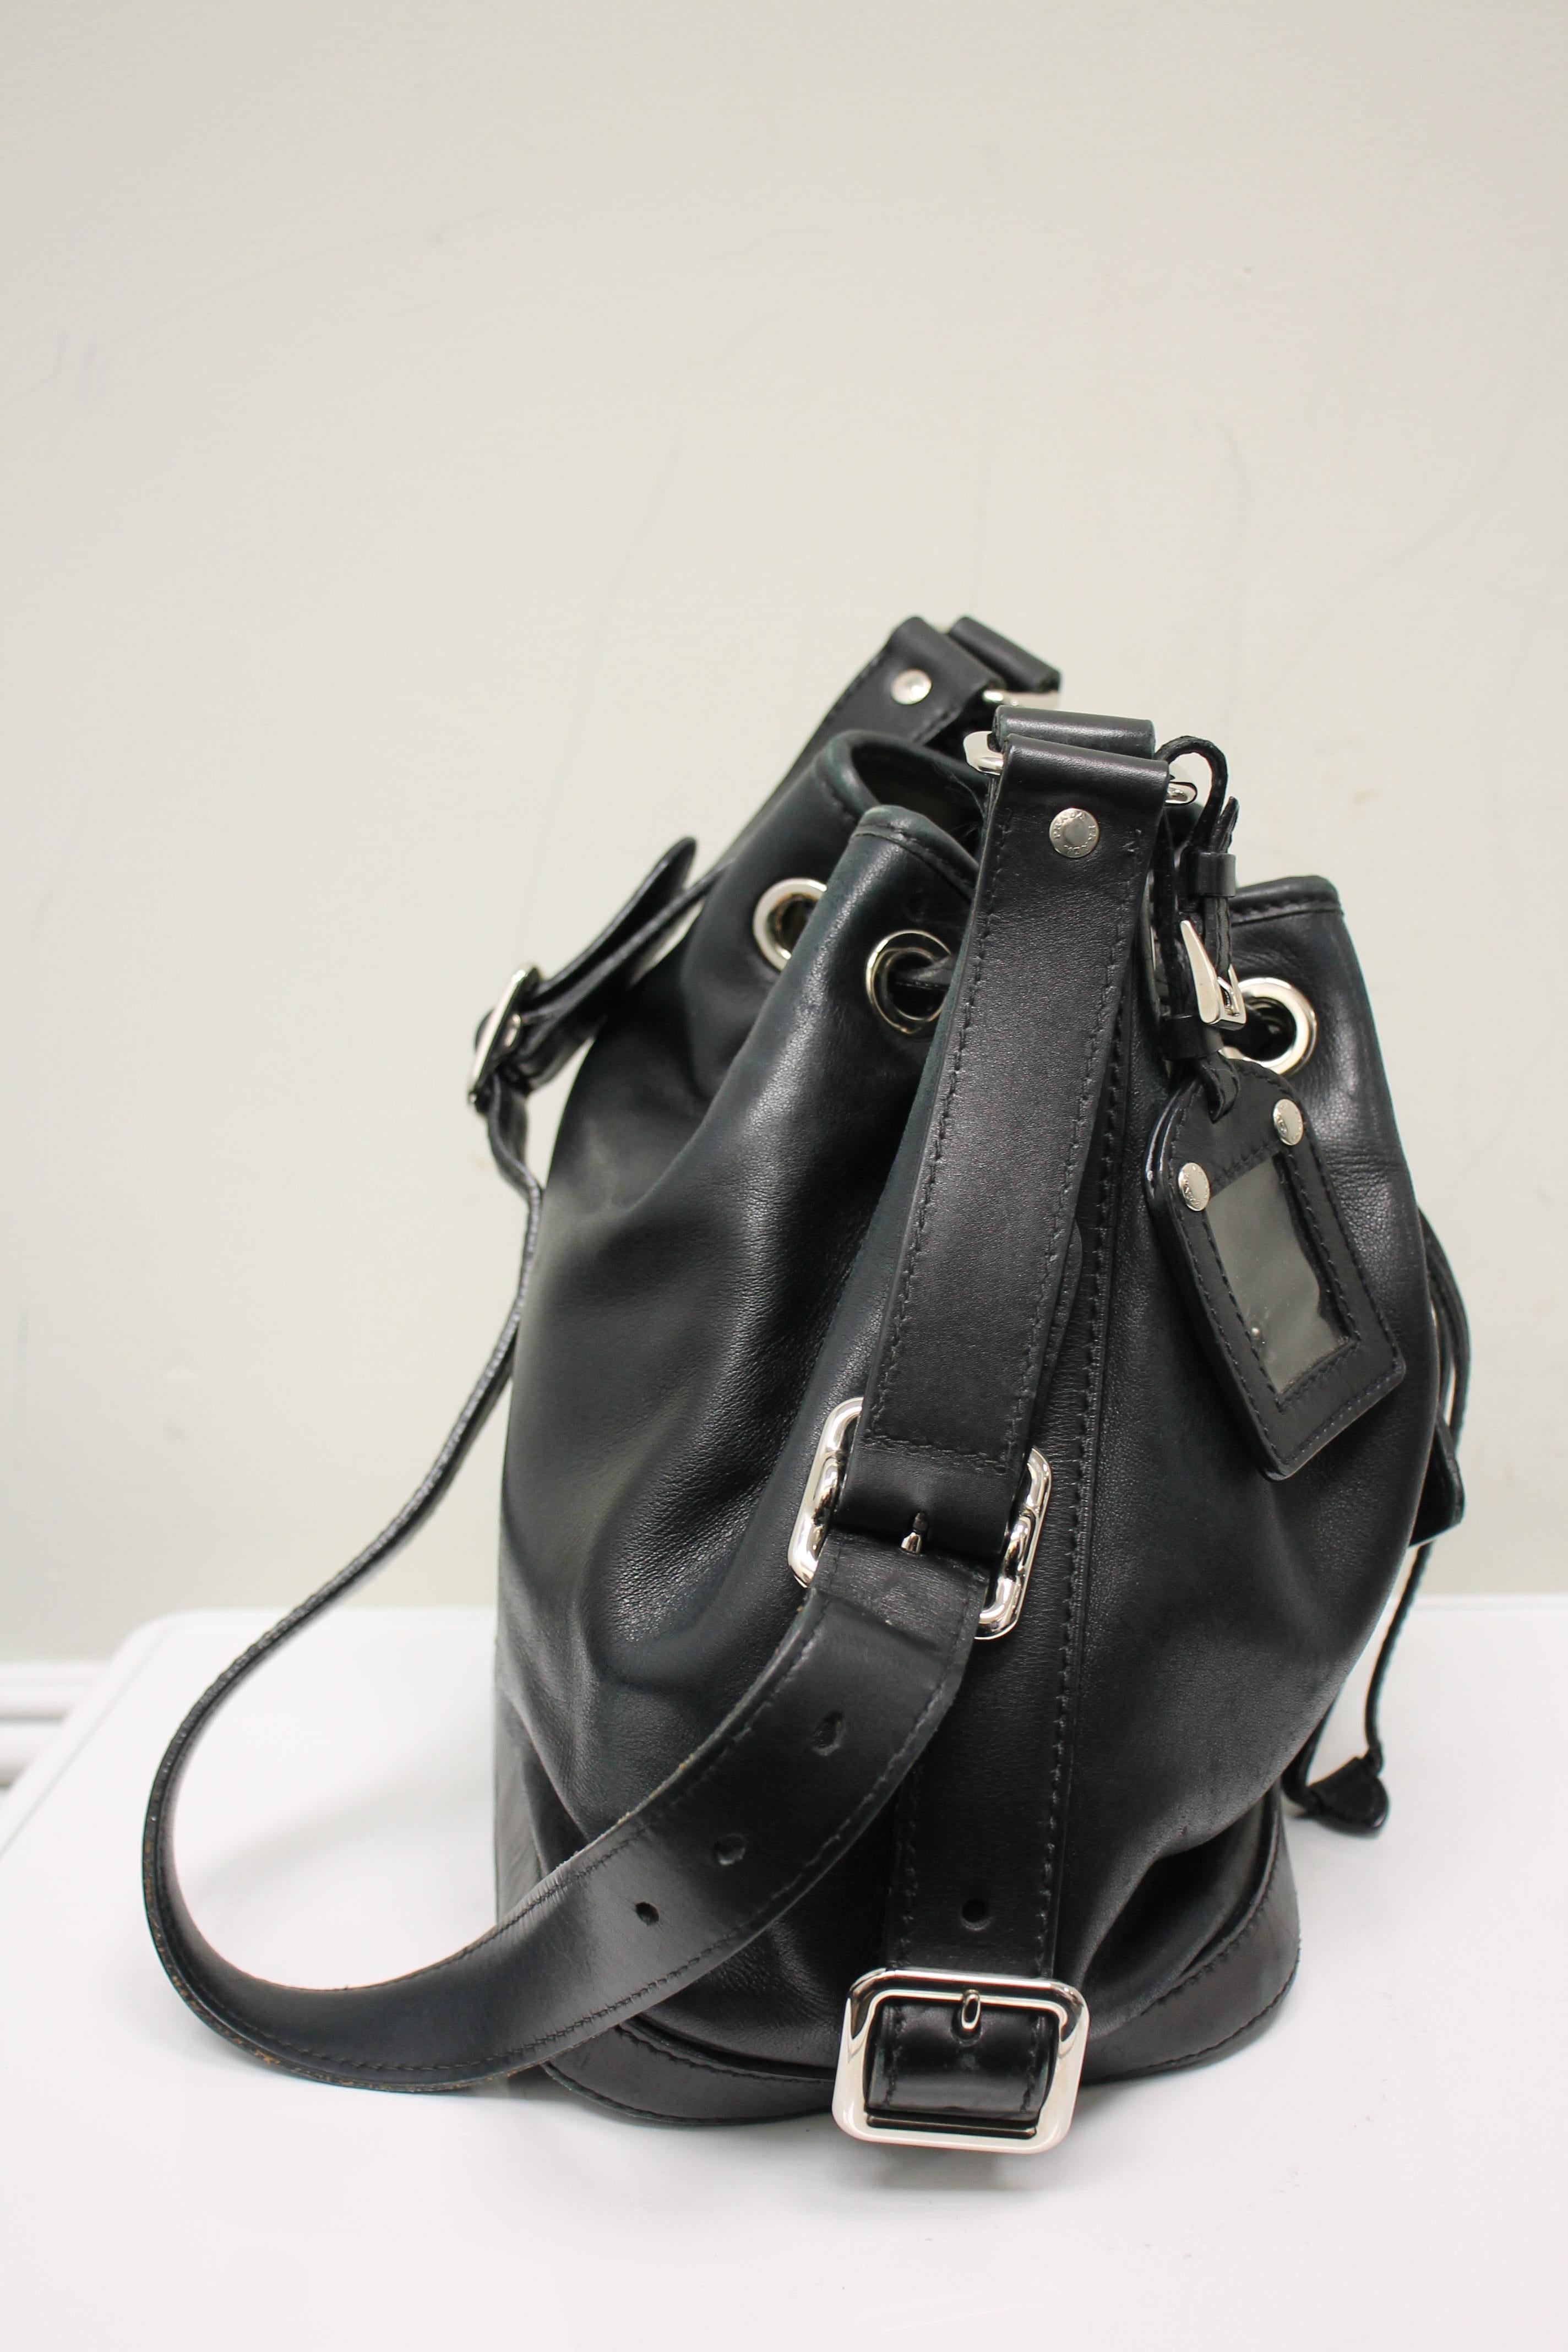 Prada Leather Bucket Bag In Good Condition For Sale In Roslyn, NY